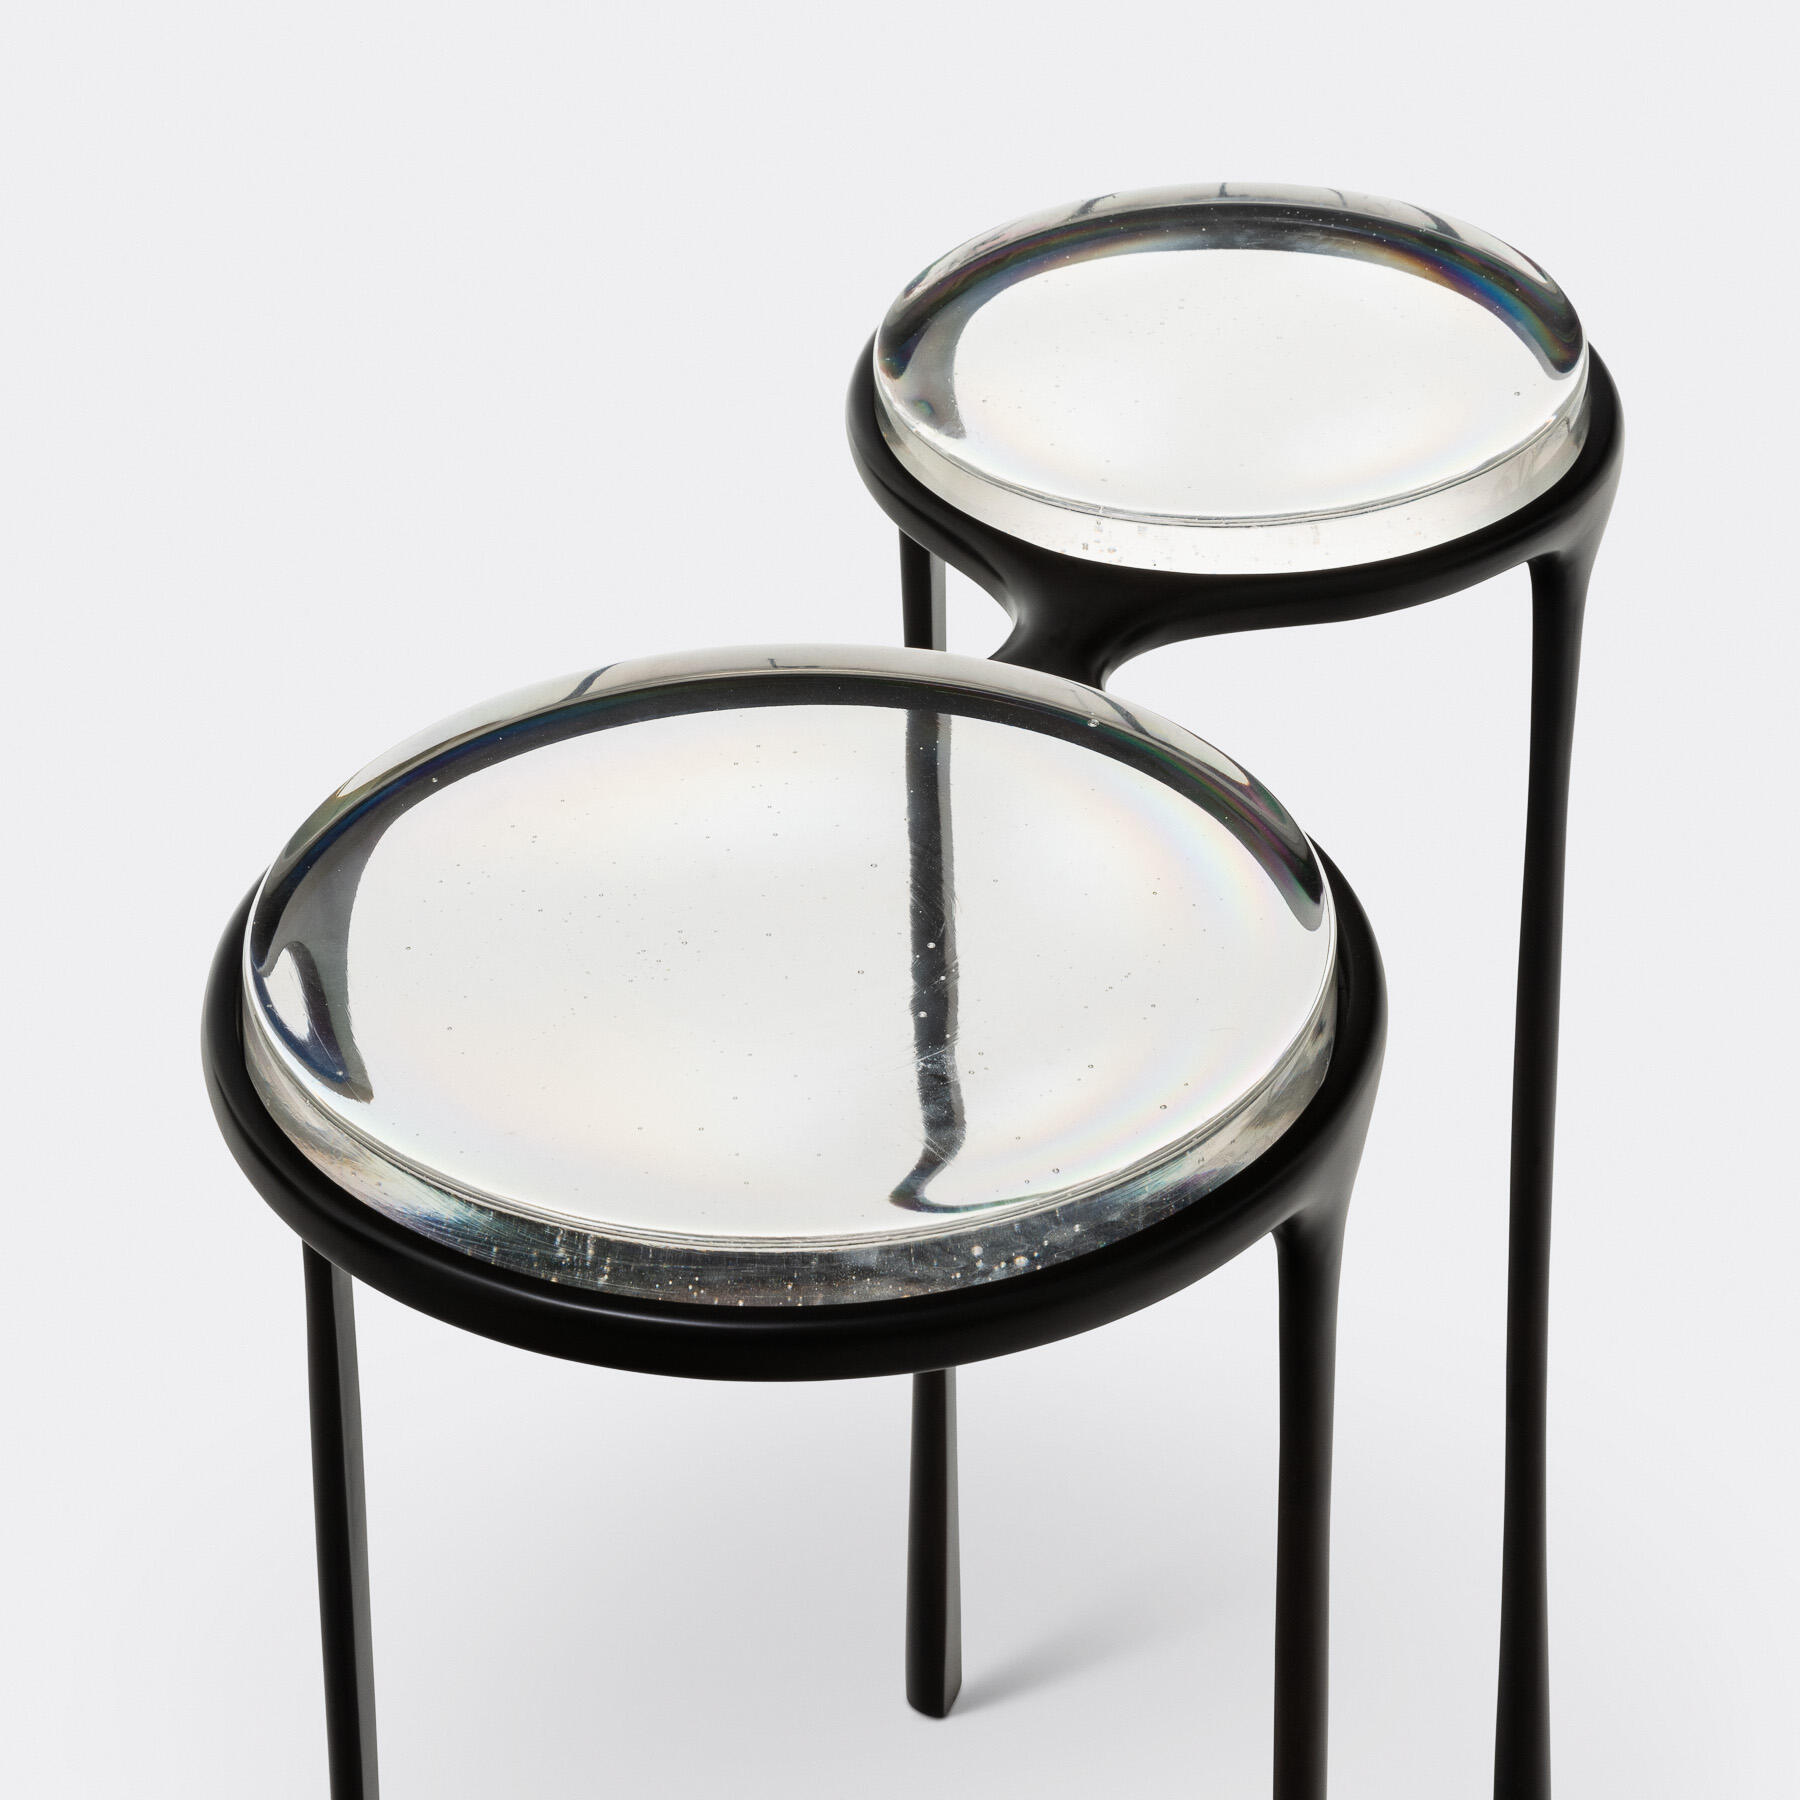 Spectacles Side Table, Monument Dark, Clear